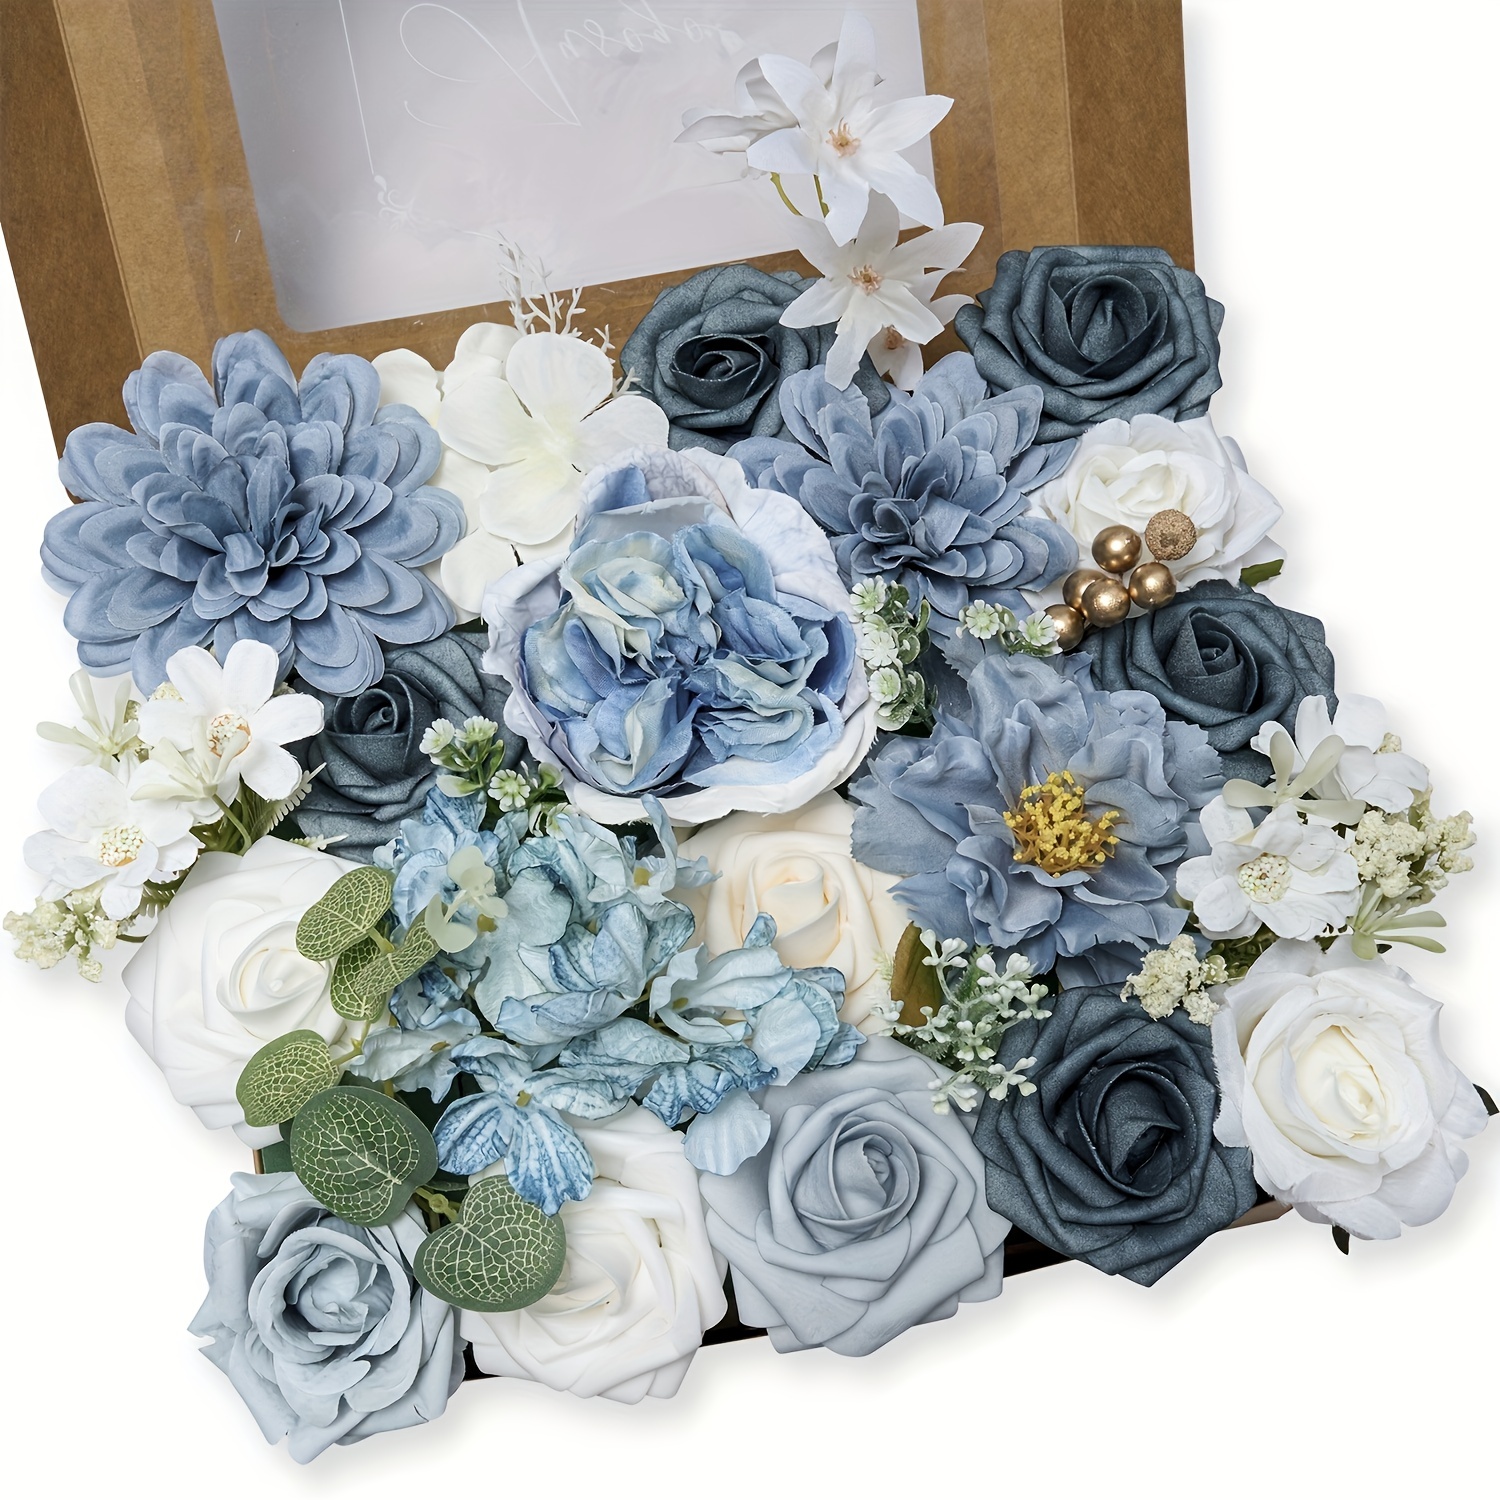  120 Pcs Silk Flowers Faux Flower Heads Craft Flowers 12 Colors  Artificial Small Flowers for Crafts Wedding Wreath DIY Party Home  Decoration : Home & Kitchen